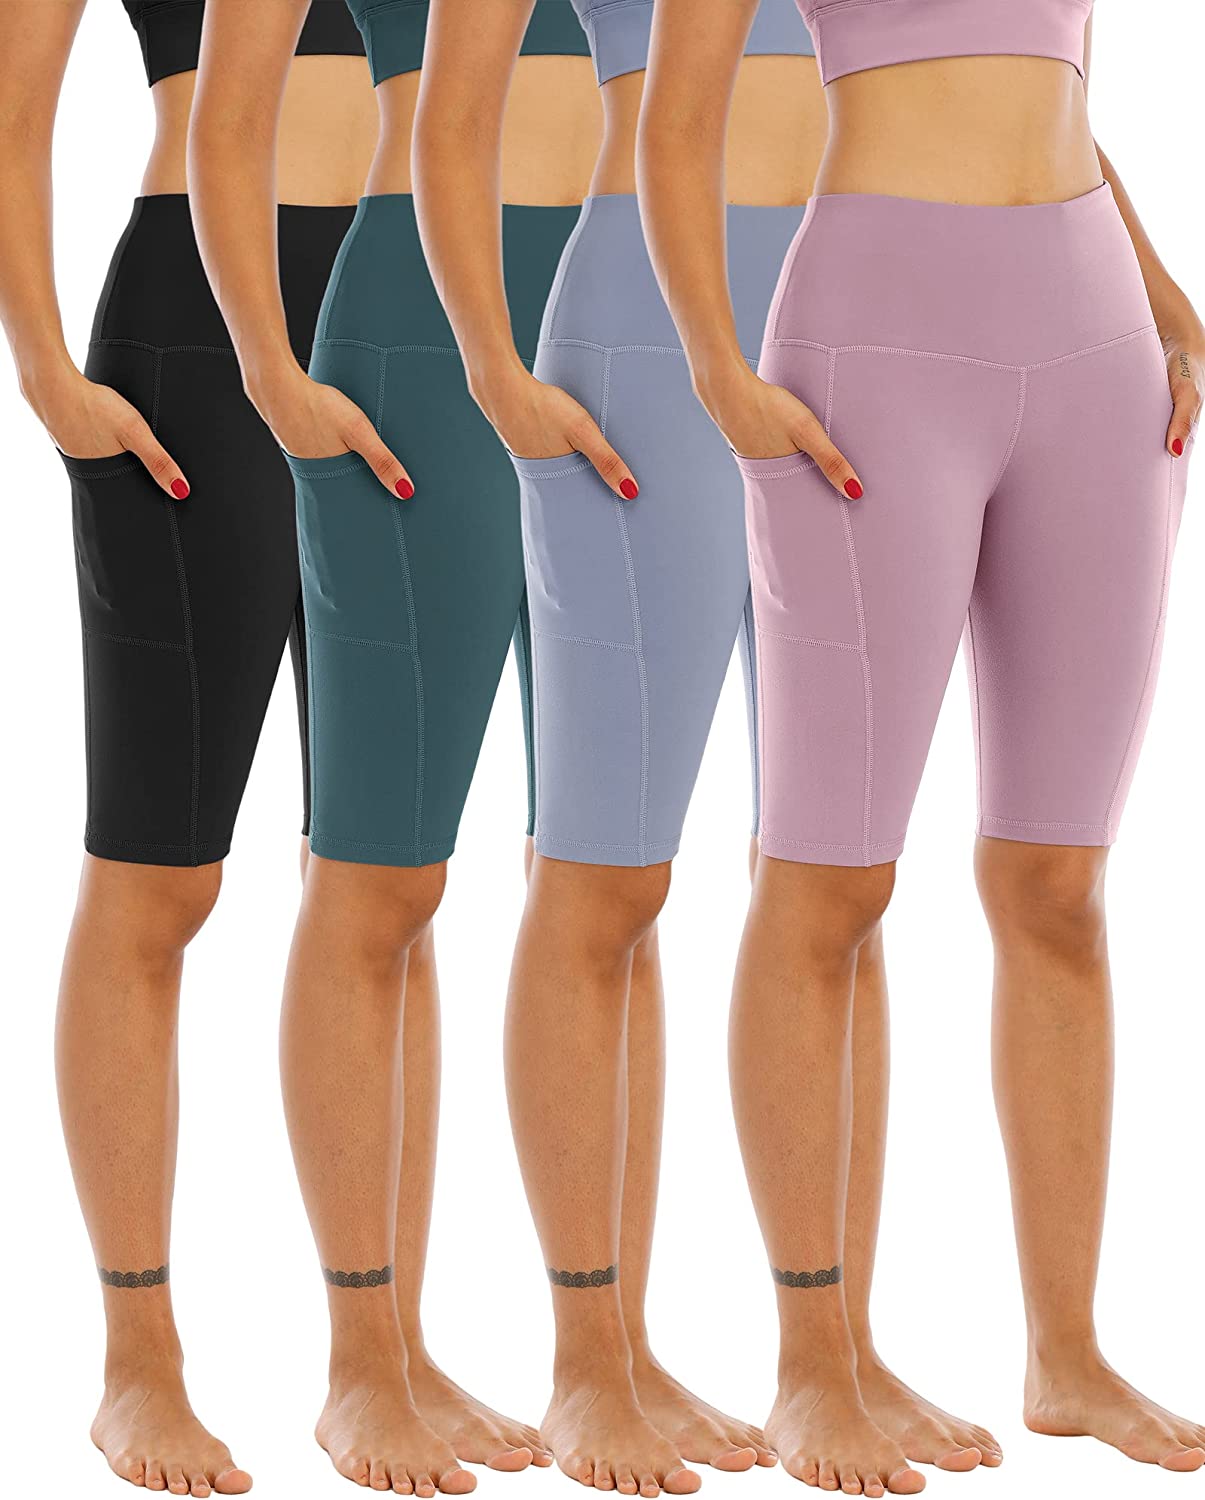 WHOUARE 4 Pack Biker Yoga Shorts with Pockets for Women, High